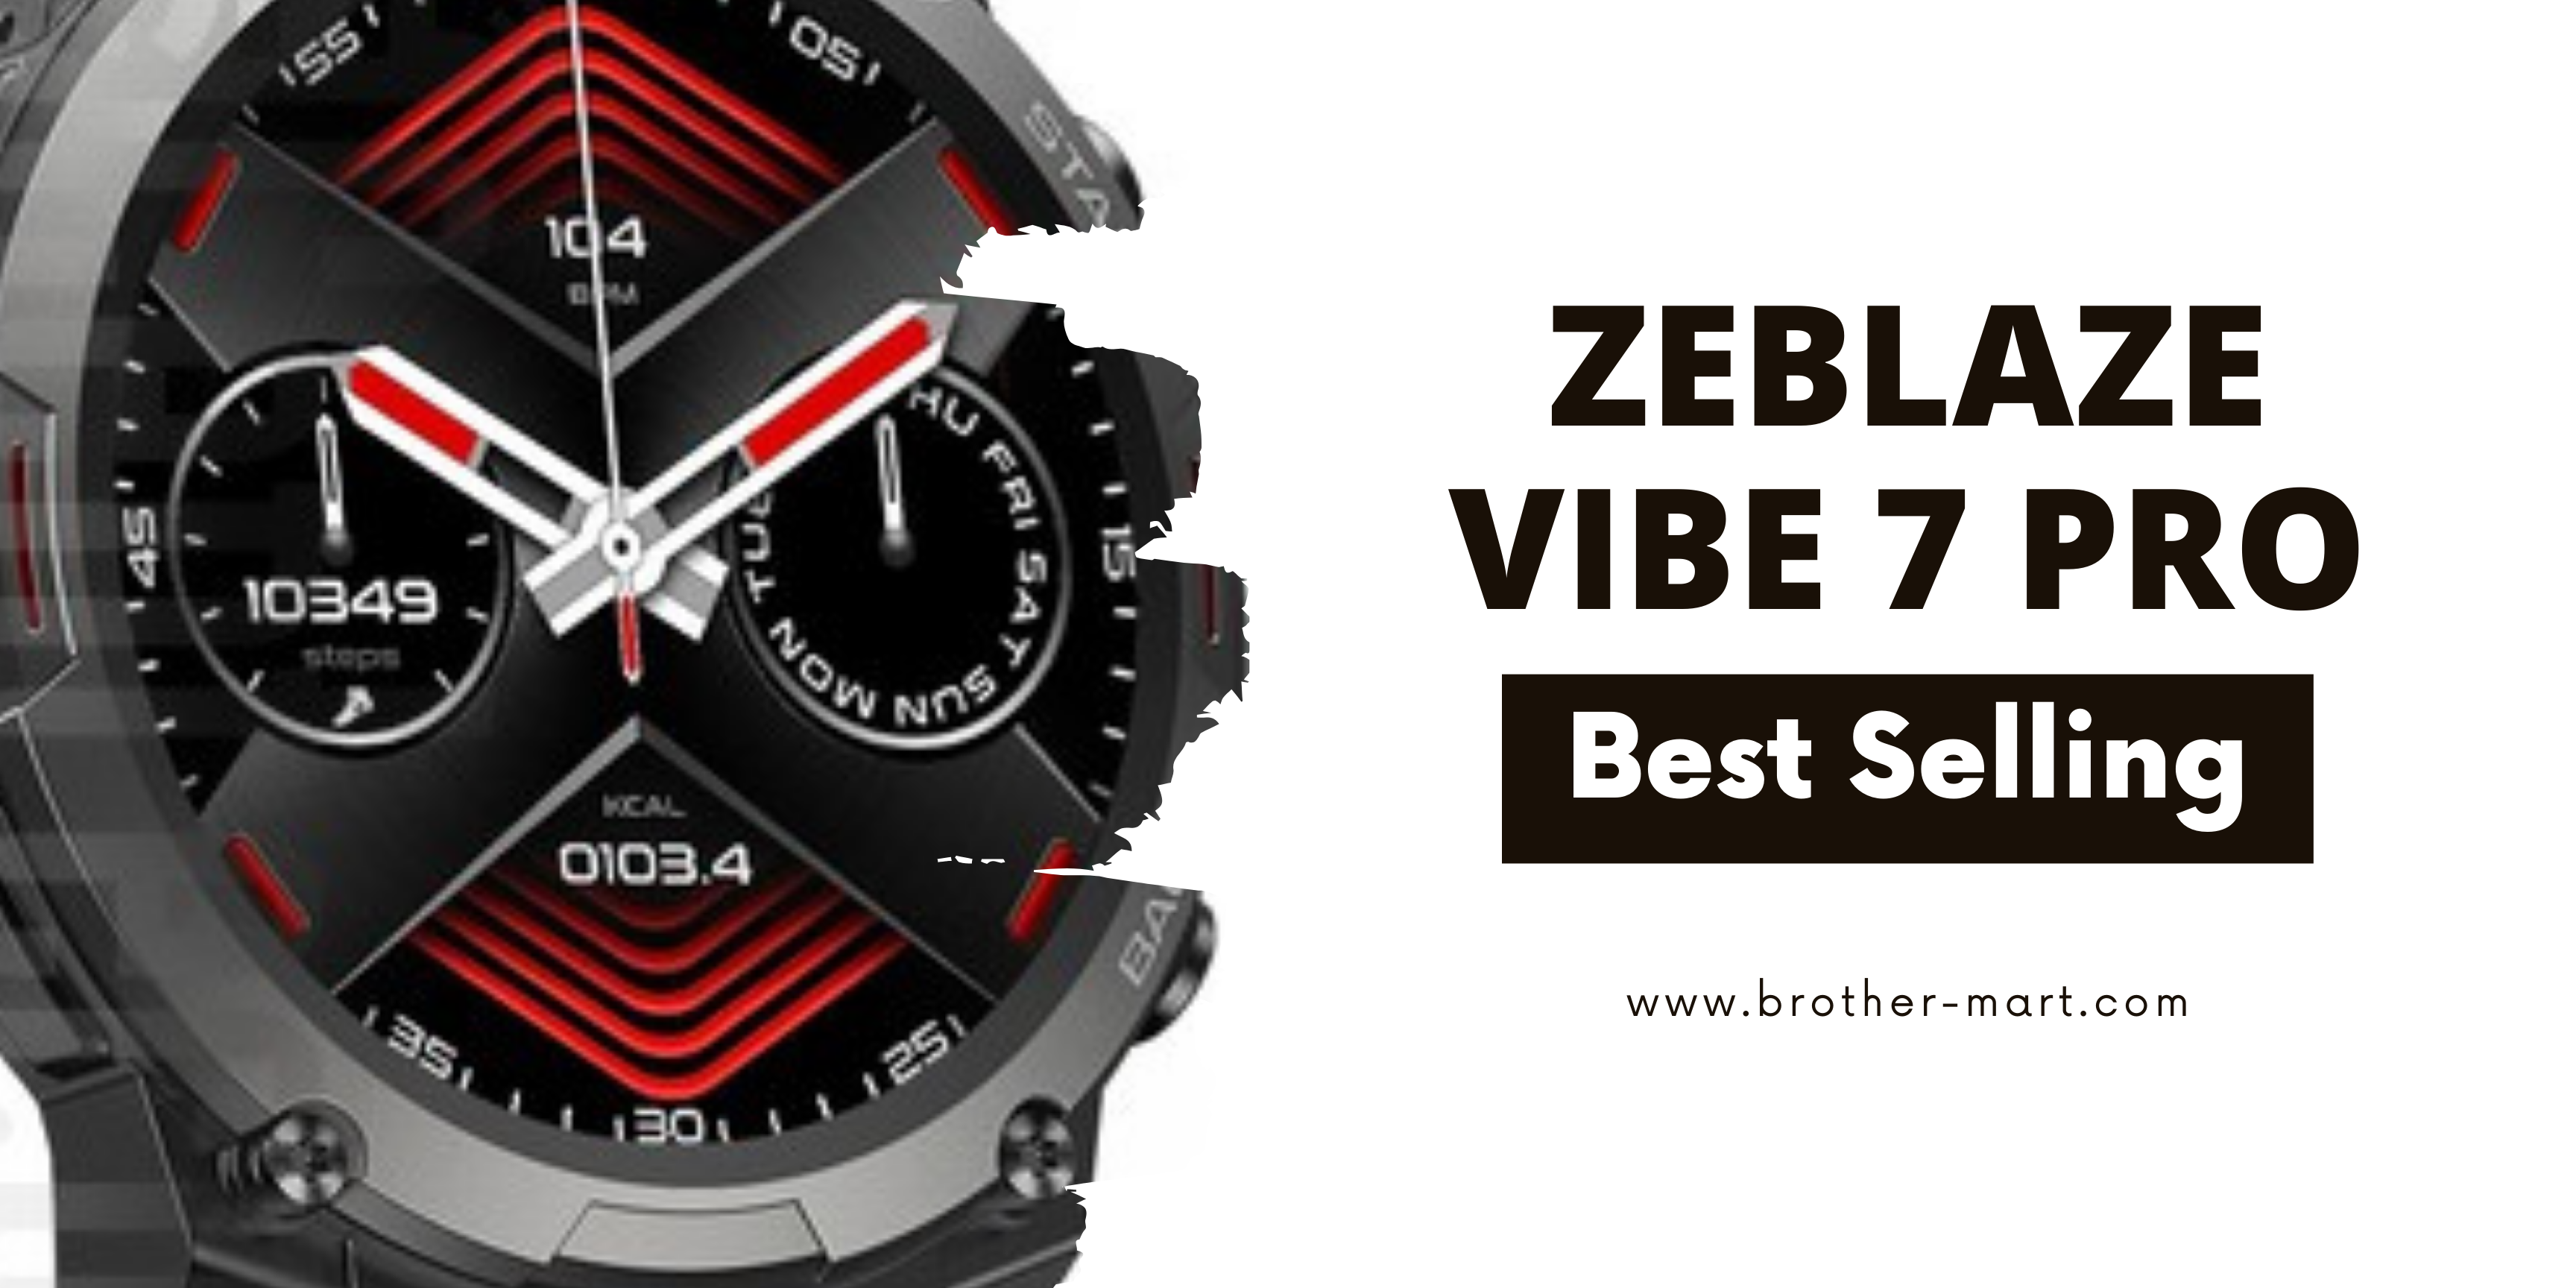 Vibe 7 Pro Smartwatch in Nepal: A Tech Marvel Tailored for Nepal's Gadget Enthusiasts